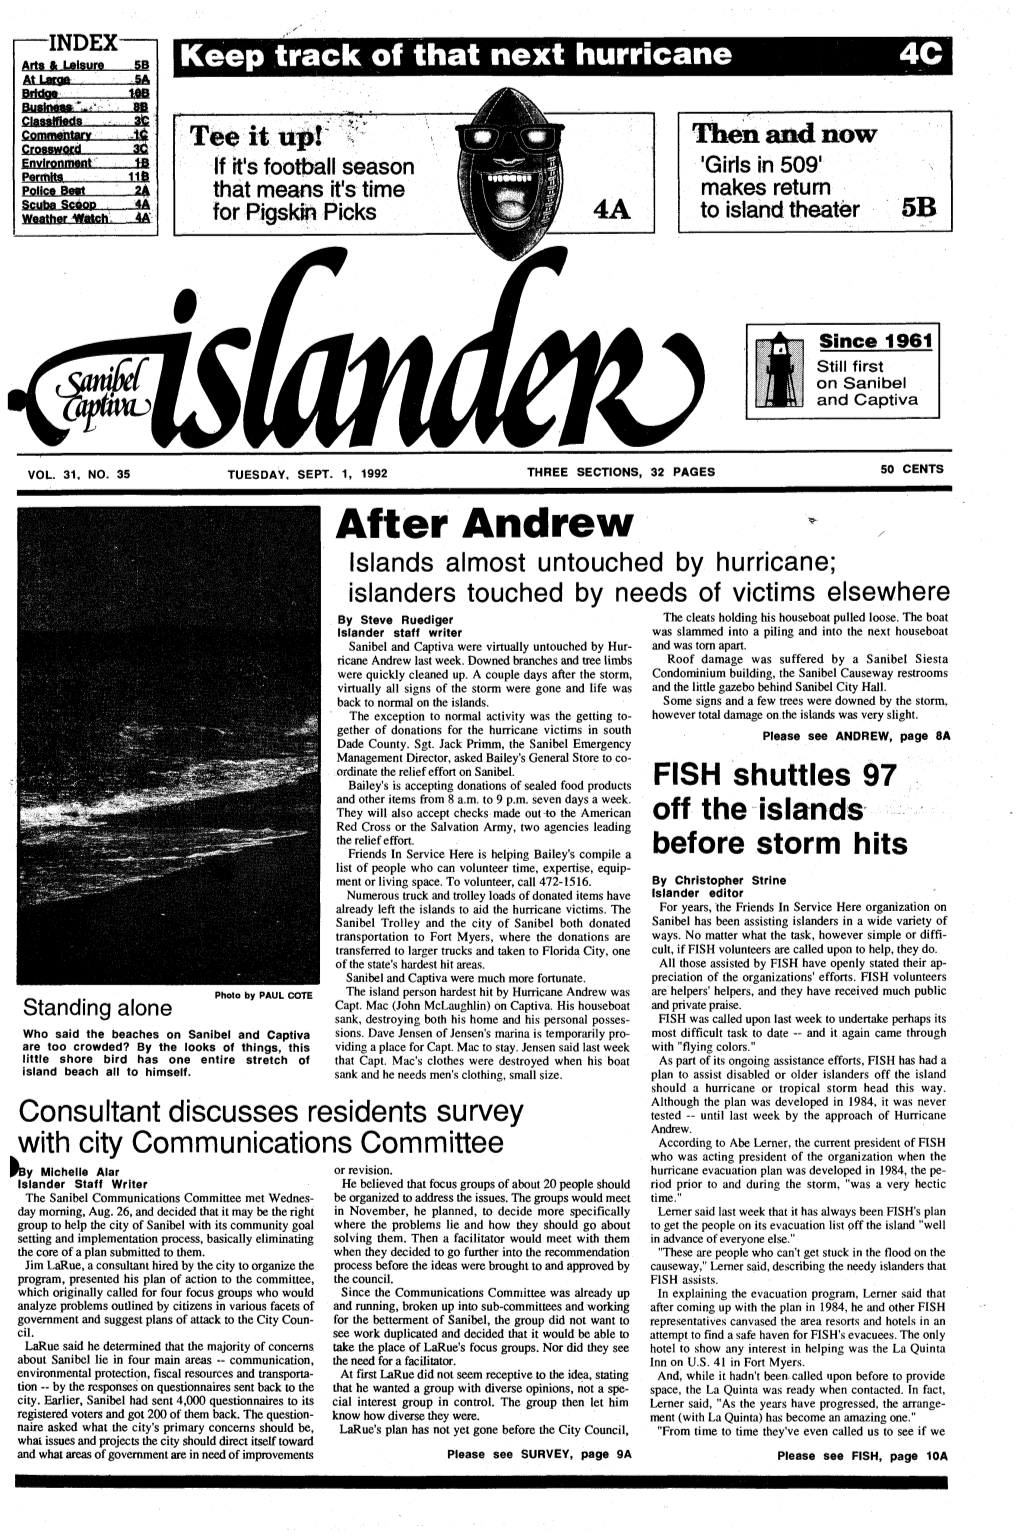 After Andrew Islands Almost Untouched by Hurricane; Islanders Touched by Needs of Victims Elsewhere by Steve Riiediger the Cleats Holding His Houseboat Pulled Loose